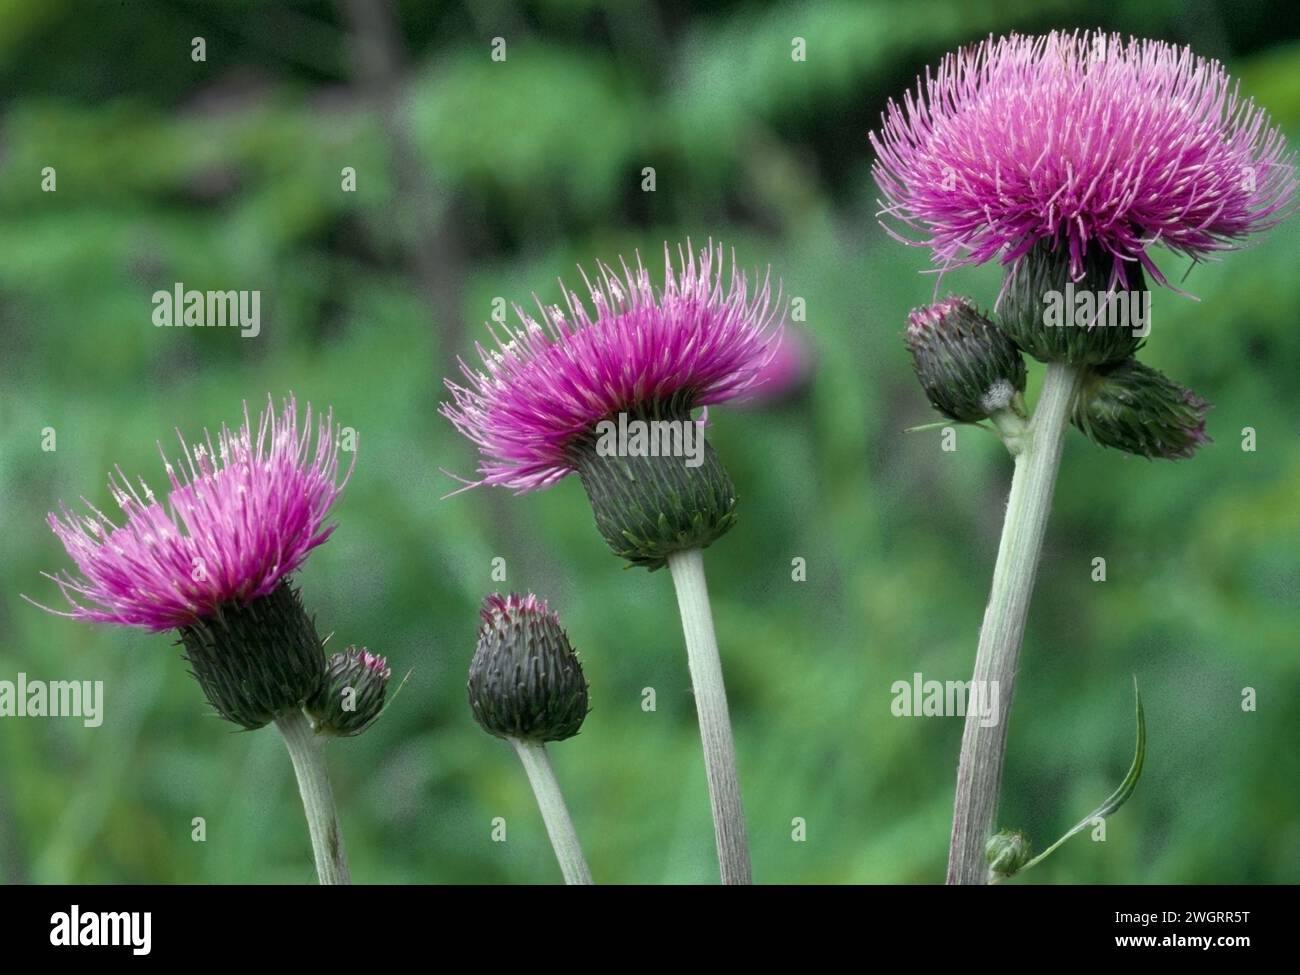 Melancholy Thistle (Cirsium helenioides) close-up of flowerheads of plants growing by roadside, Lochaber, Scotland, June 1989 Stock Photo